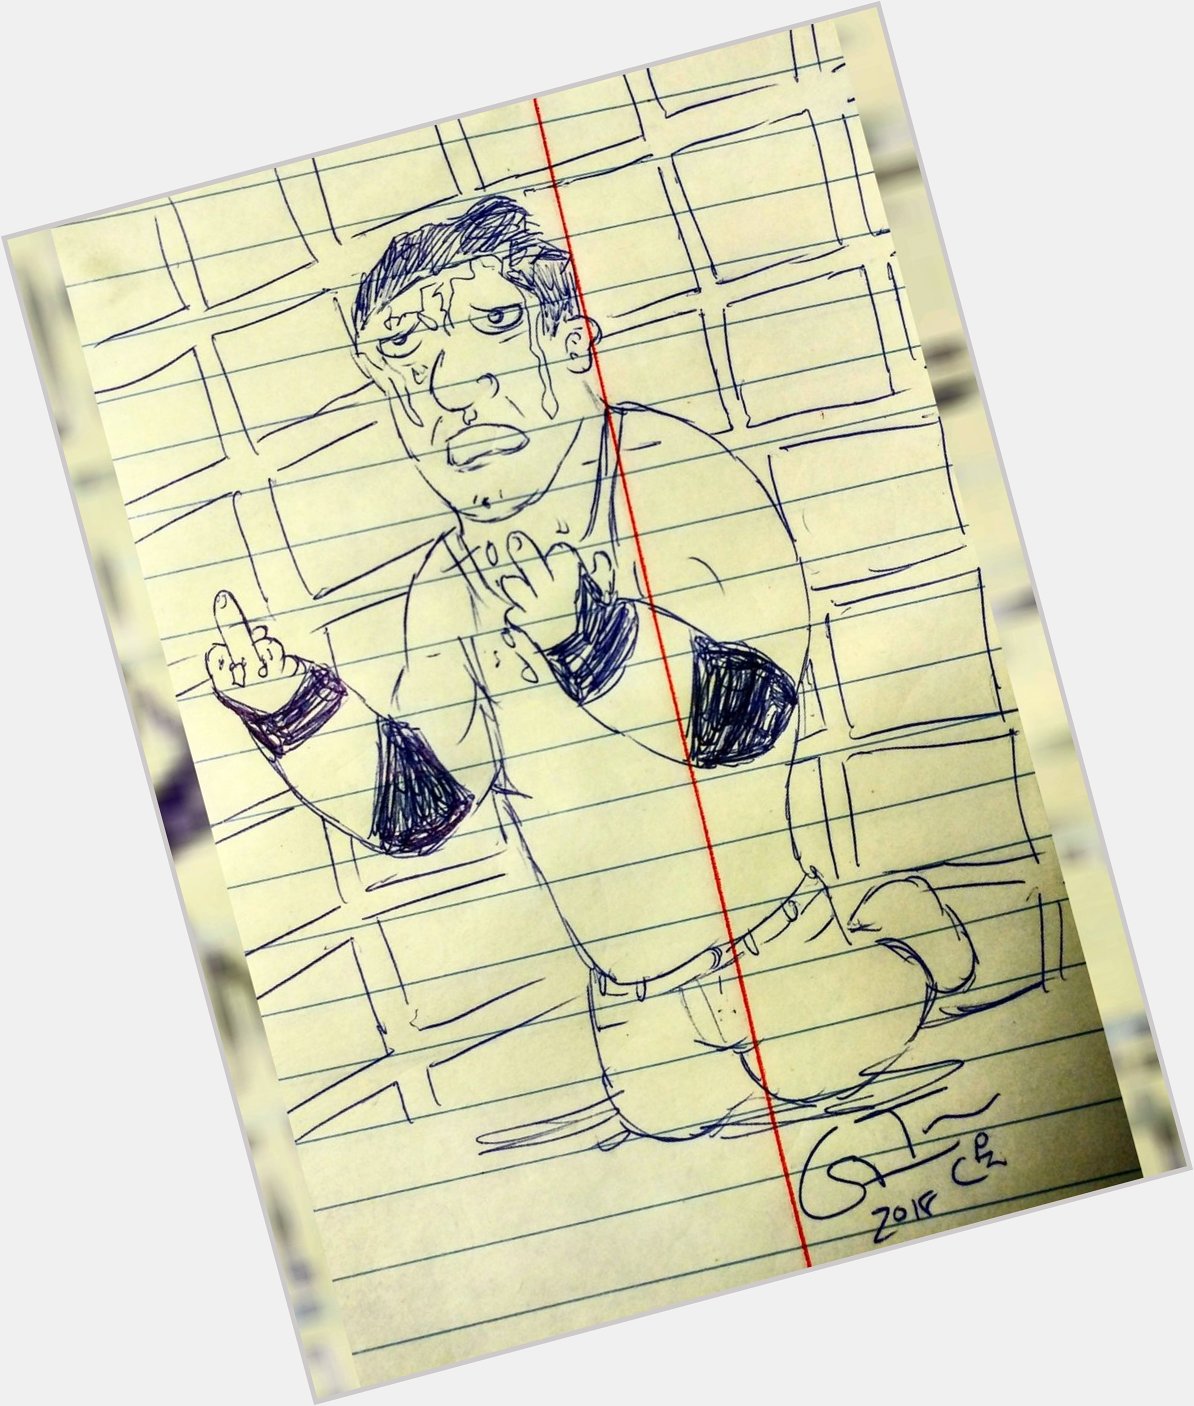 Happy birthday, Vince McMahon.

Terrible Doodle by Gregory Iron. 